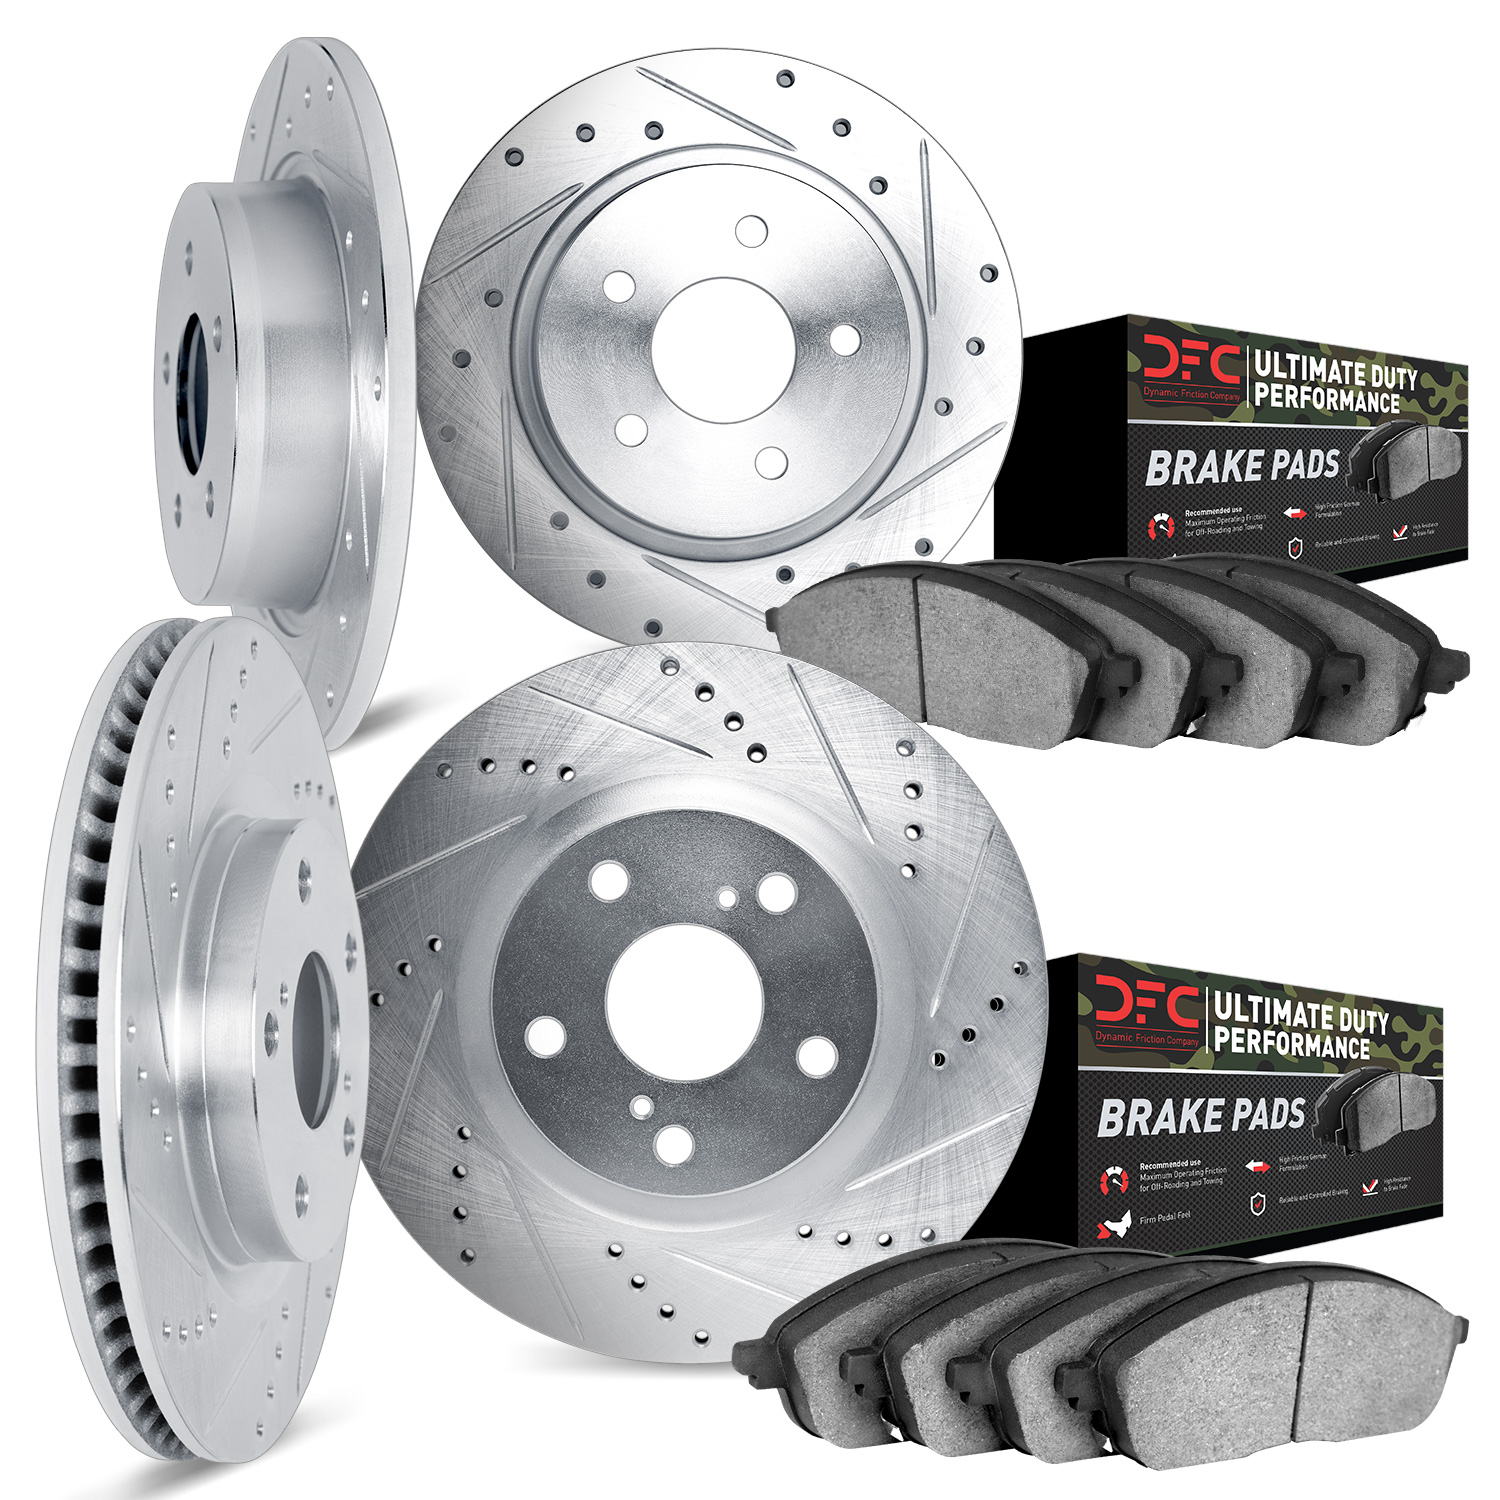 7404-42003 Drilled/Slotted Brake Rotors with Ultimate-Duty Brake Pads Kit [Silver], Fits Select Mopar, Position: Front and Rear